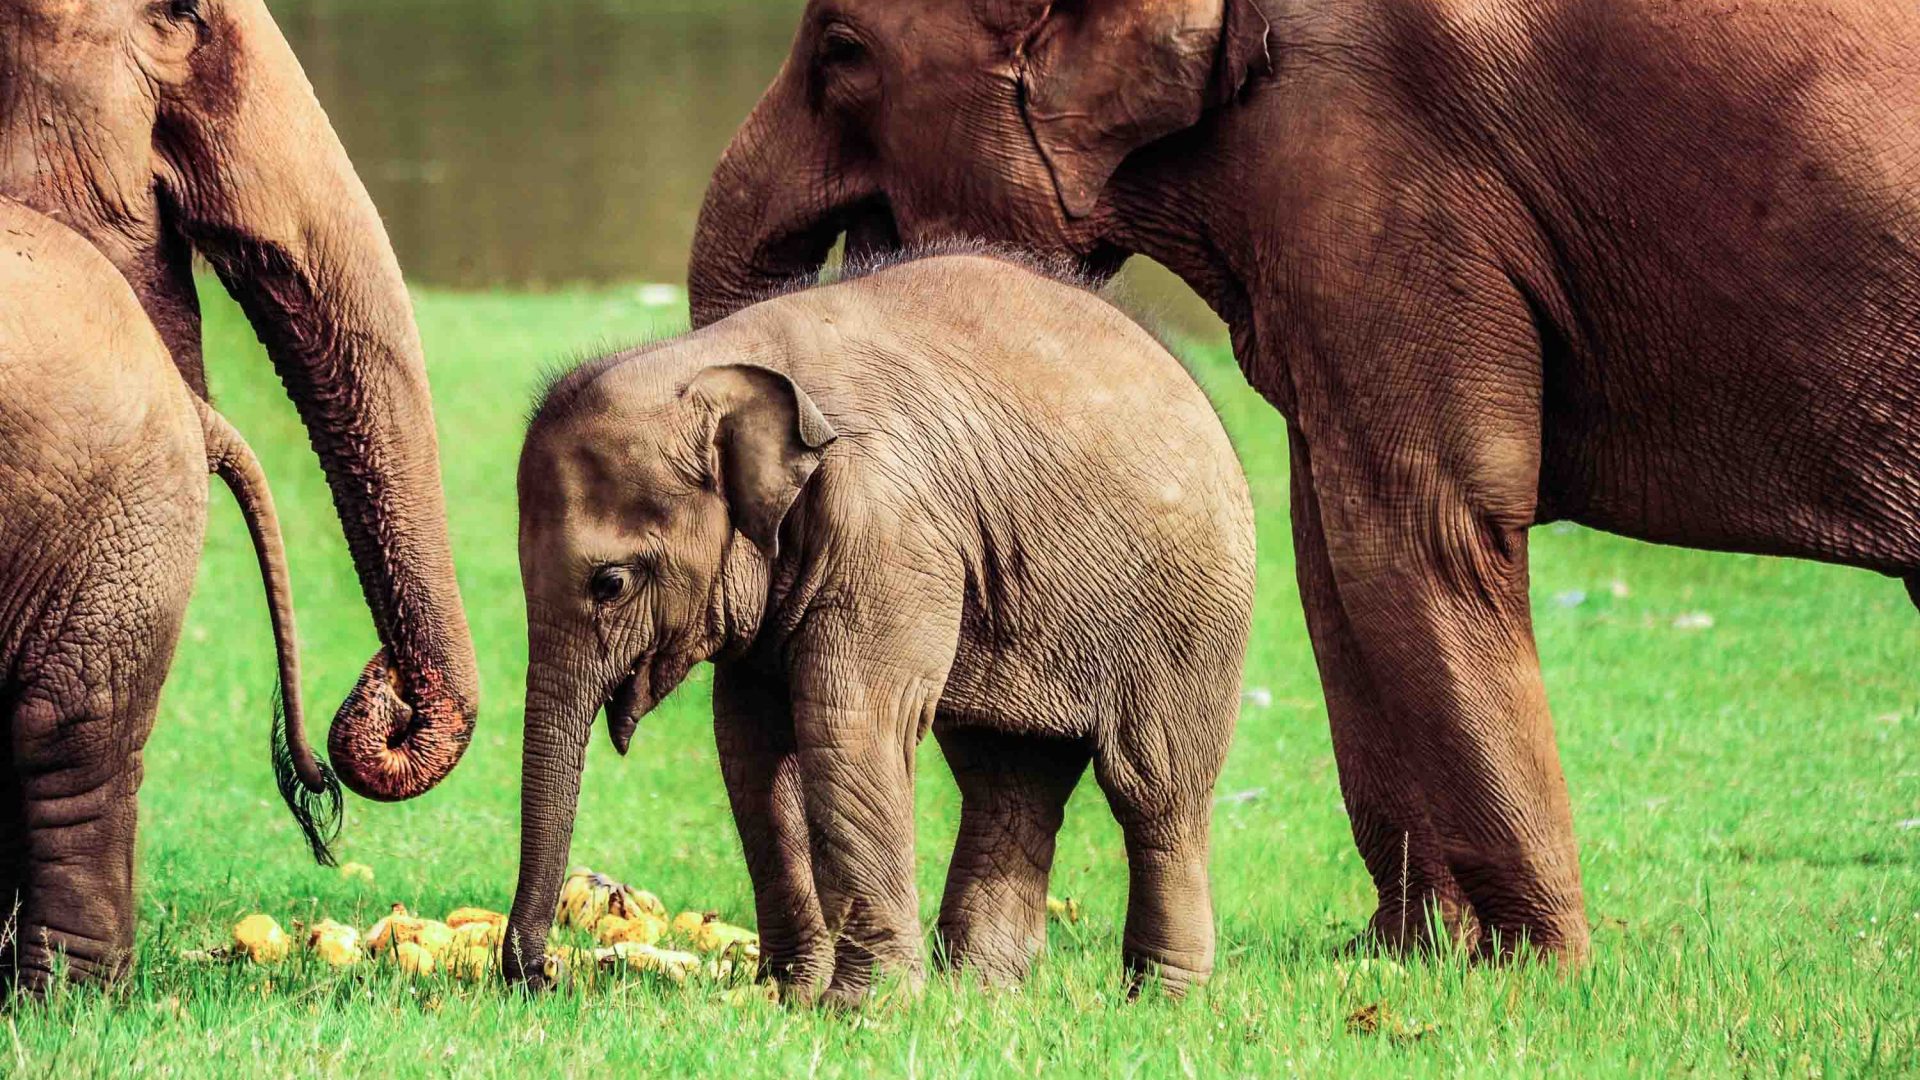 Baby Cha Ba stands with some adult elephants in the grass.